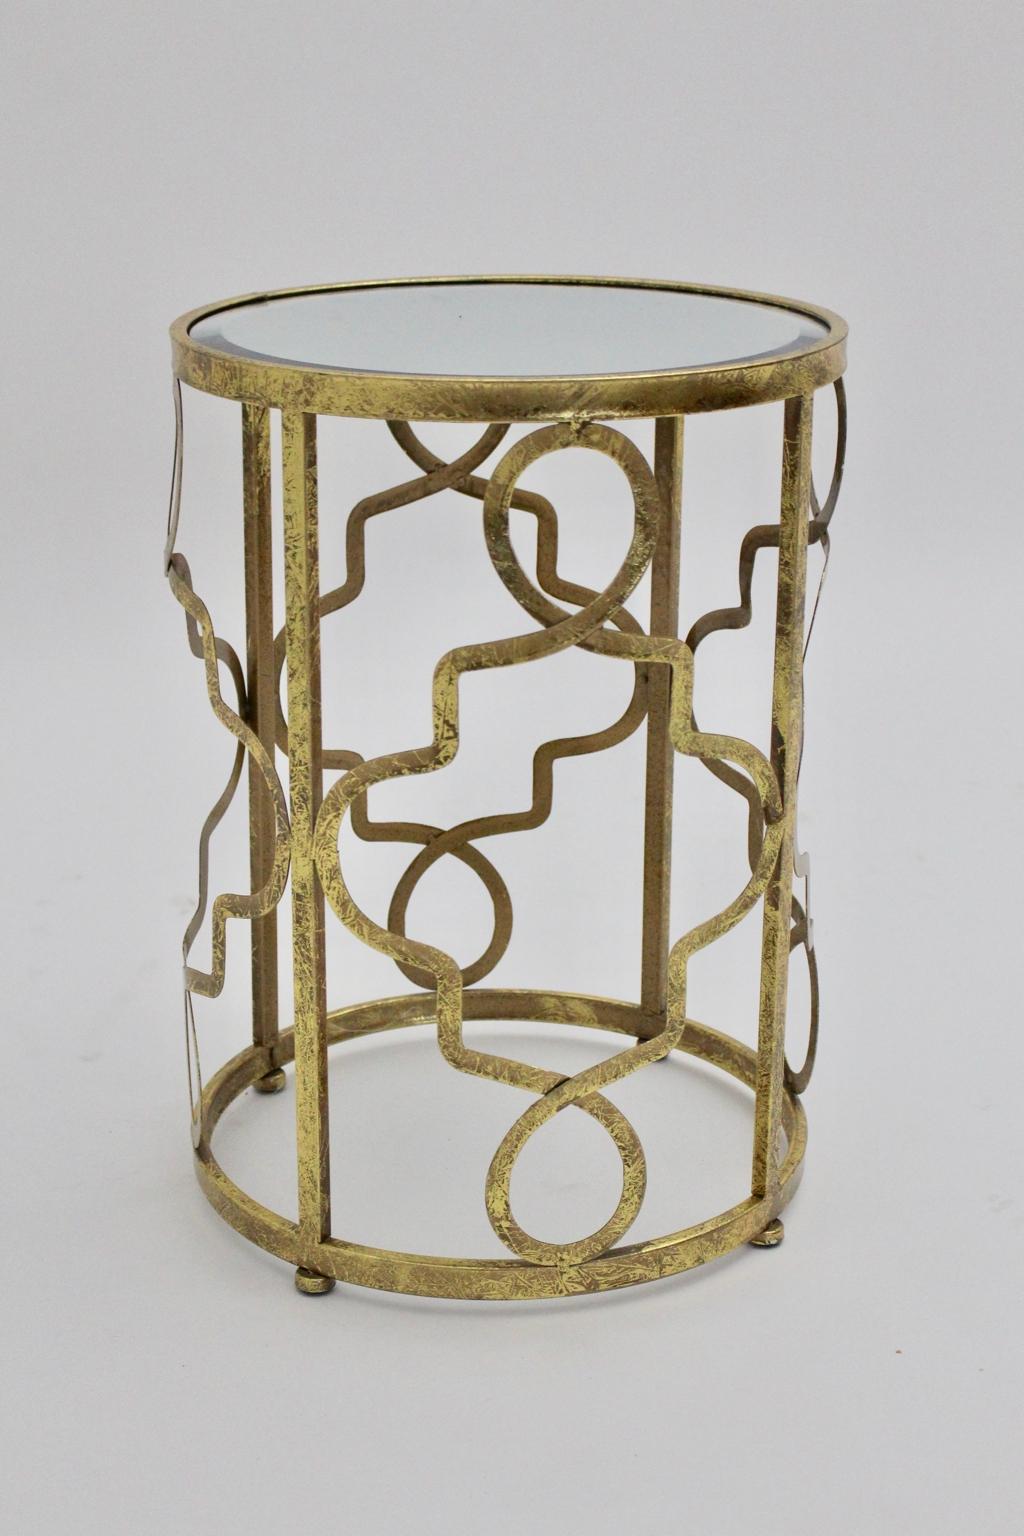 Modern vintage sculptural side table from golden metal and mirror top.
A stunning side table with a beautiful sculptural base topped with facetted mirror.
This feminine side table or column works perfectly to present your table lamp or your green